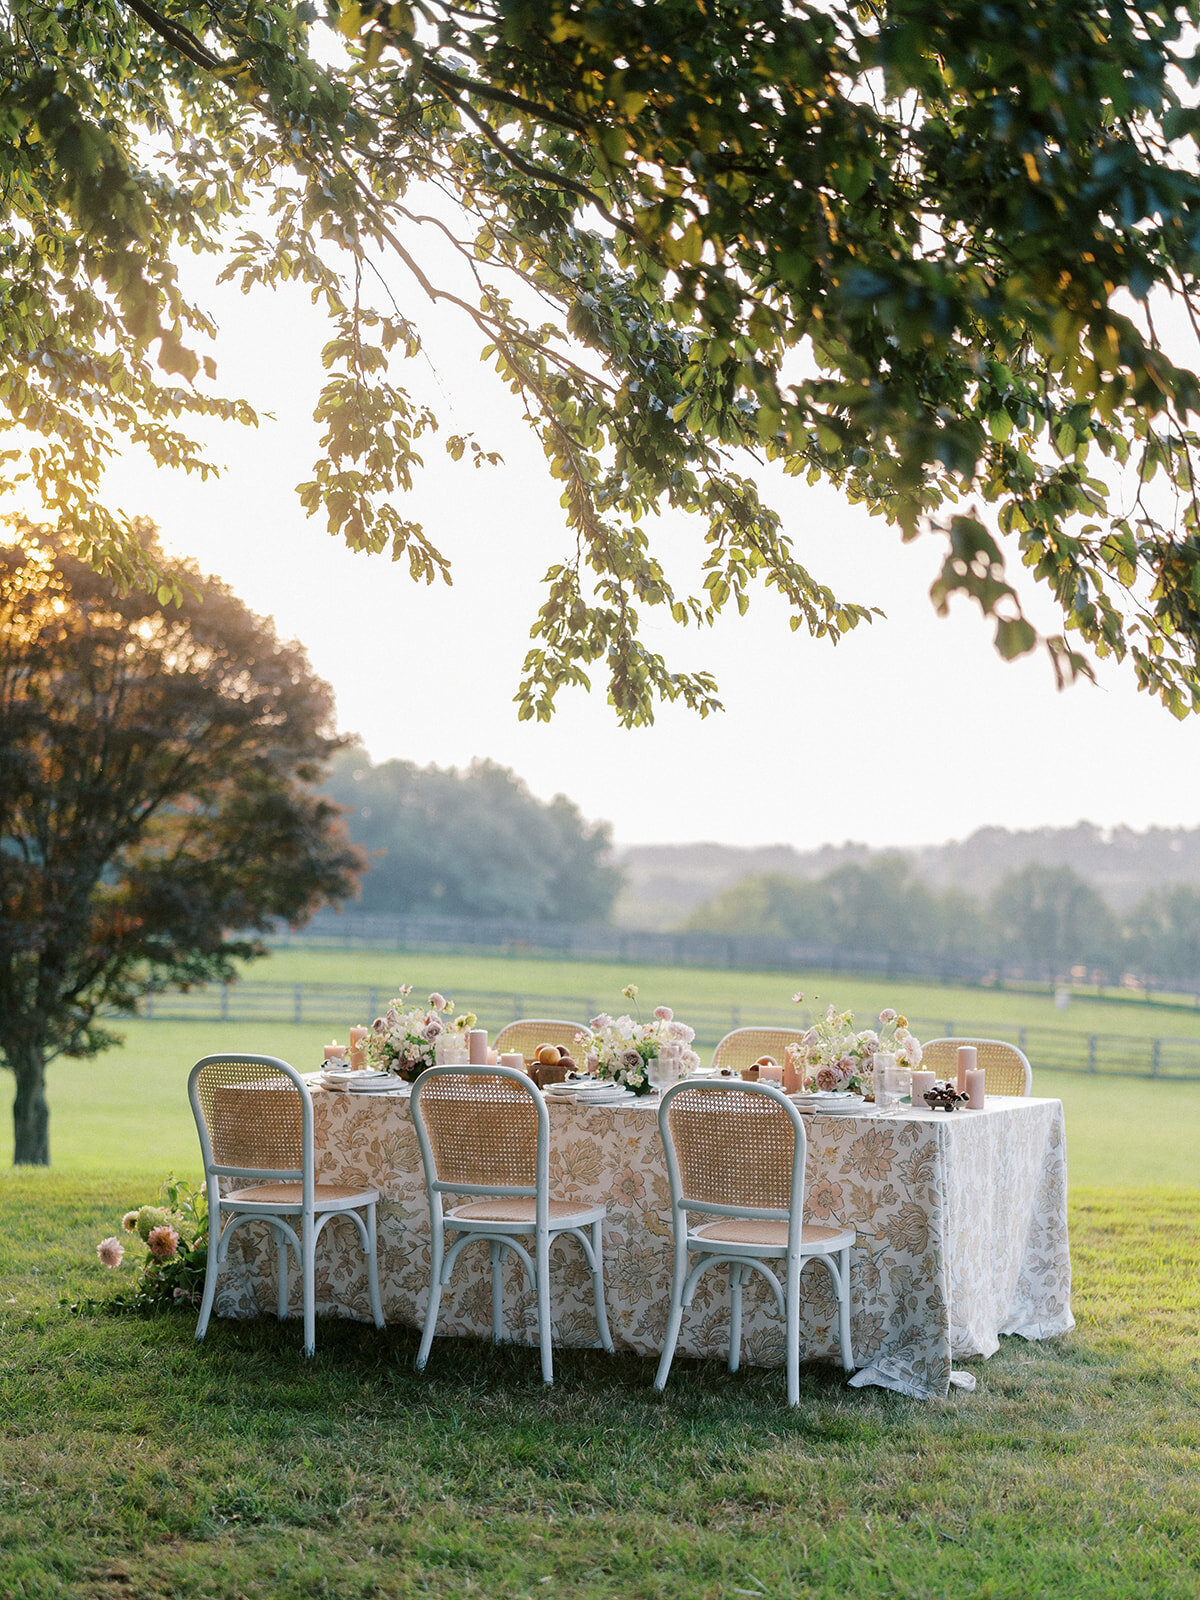 Long table  overlooking Harford Hills landscape with floral-patterned linen with blush pillar candles, fresh fruit and blush, taupe, cream and mauve wispy floral compotes going down the length of the table.